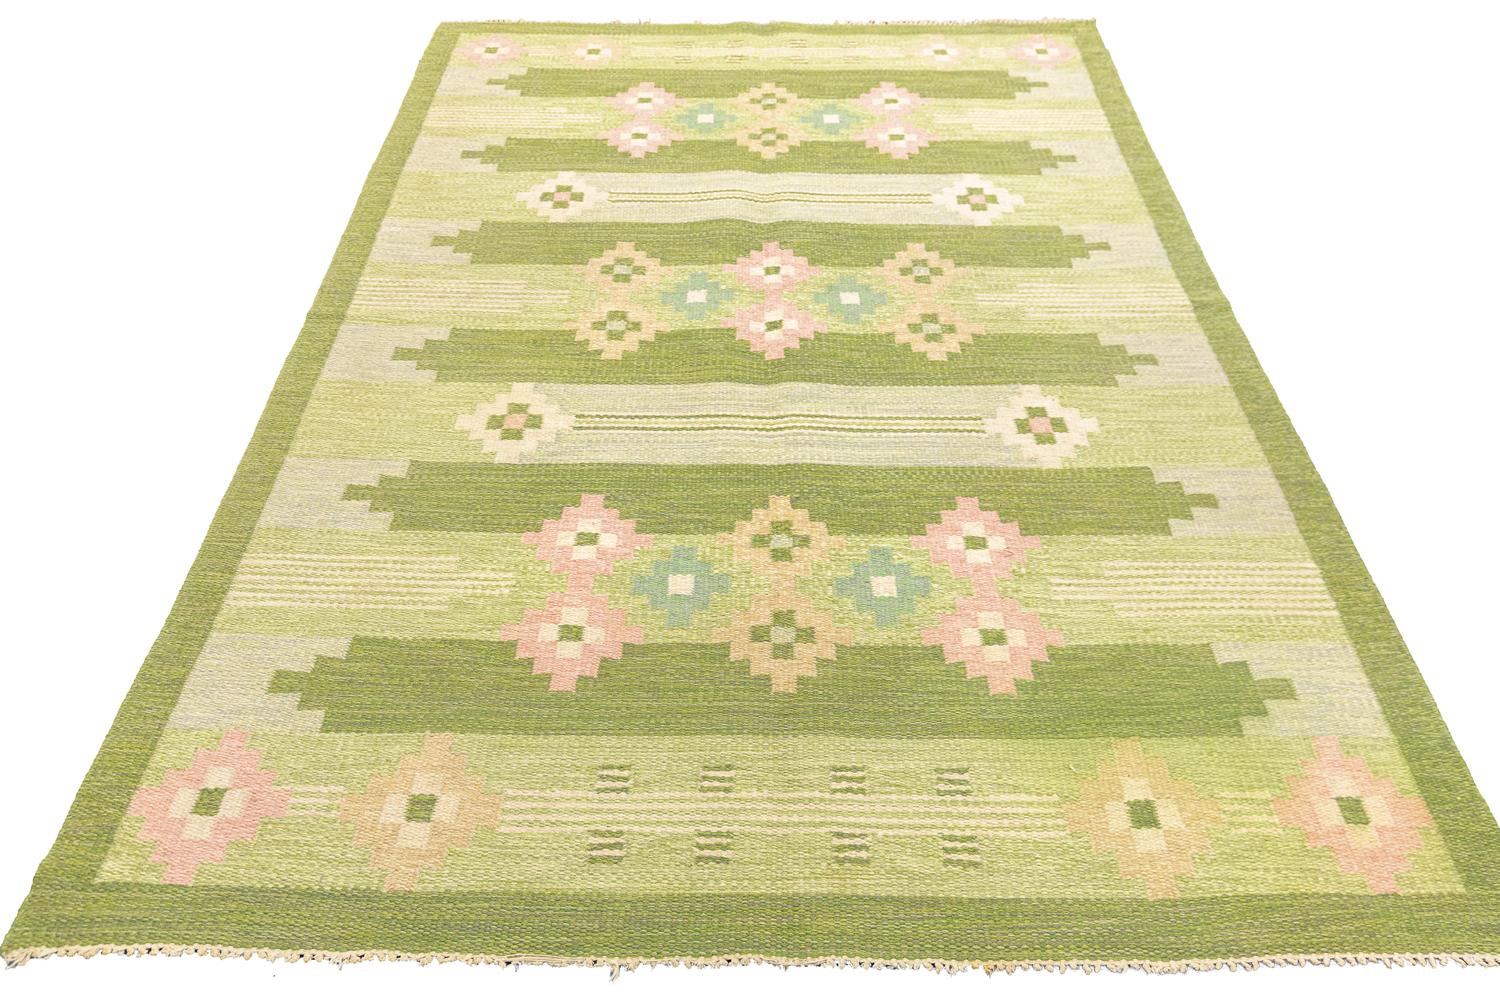 Hand-Knotted Vintage Swedish Flat-Weave Kilim by Ingegerd Silow, 1950-1970